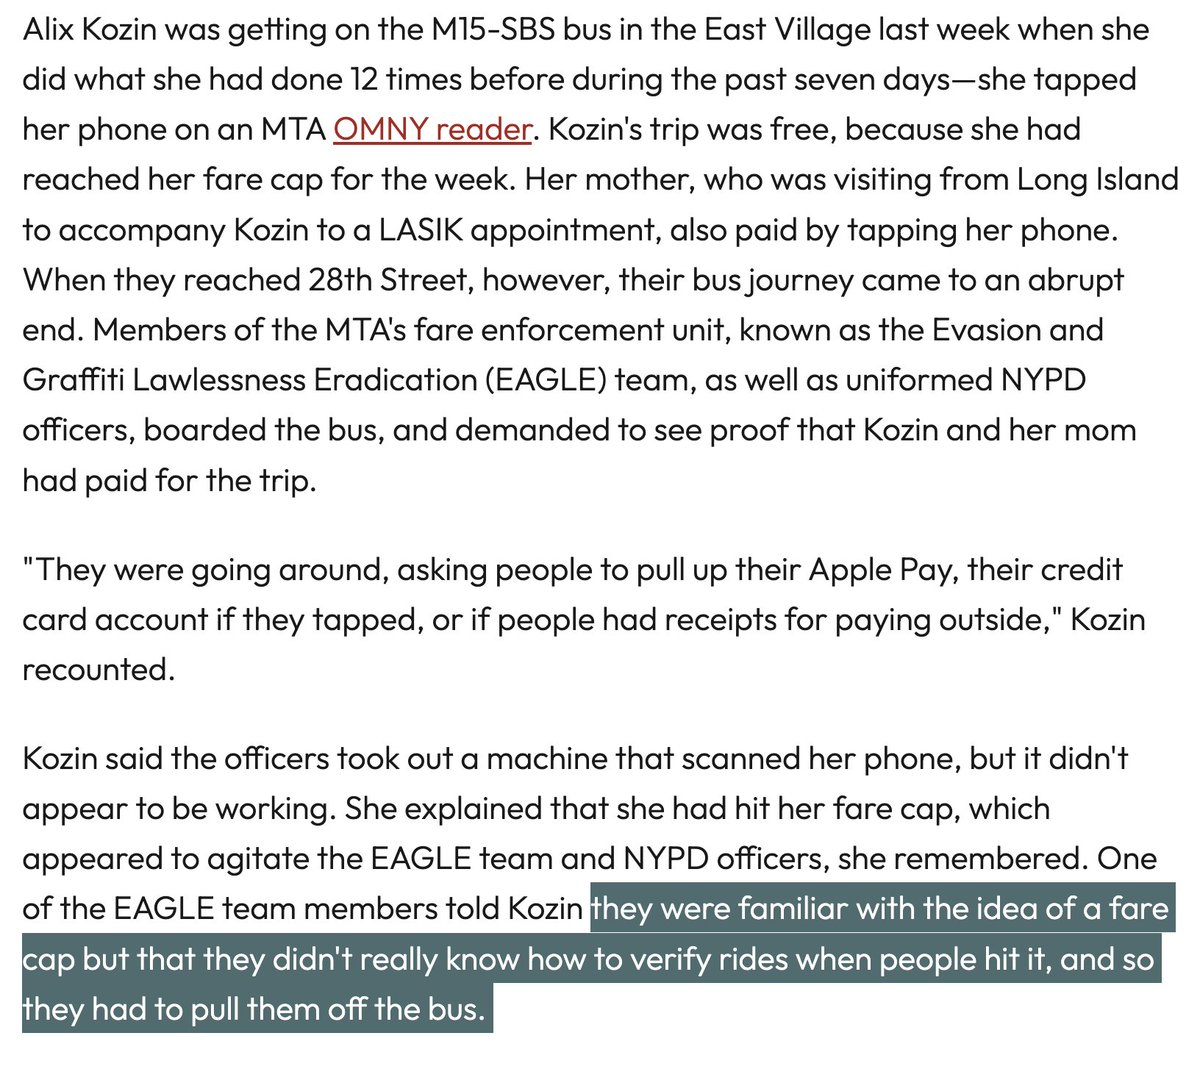 This woman used OMNY to pay for the bus. Once you hit 12 fares paid within a 7-day period, you get free rides. Cops boarded bus & forced riders to prove they'd paid didn't know how to handle this, threw her off, & hit her w a $100 ticket. Is this city a joke or what?